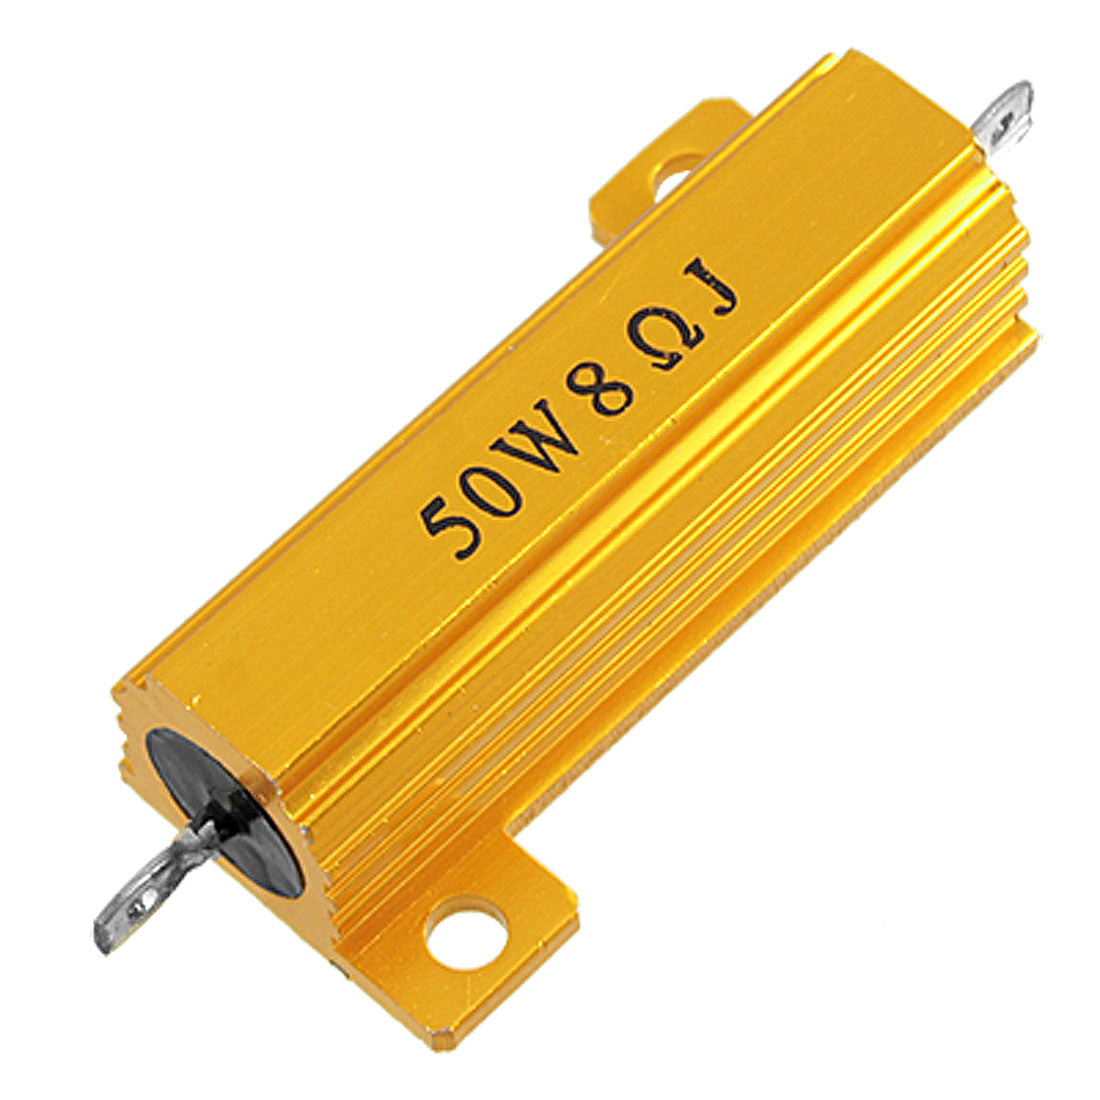 uxcell Uxcell 50 Watt 8 Ohm 5% Aluminum Housed Wirewound Power Resistor Gold Tone